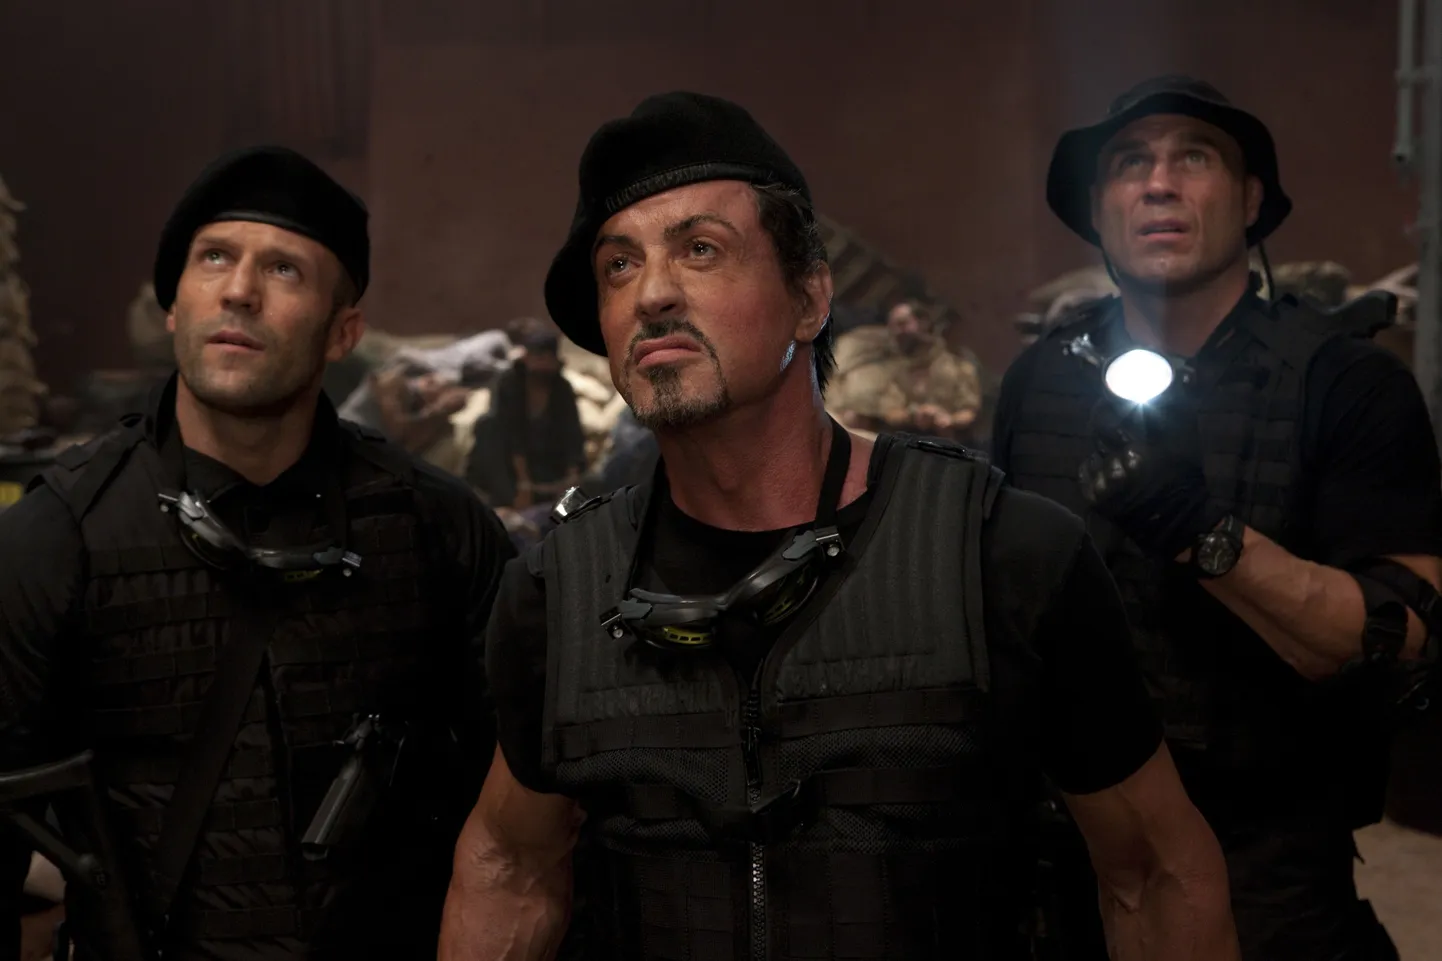 In this film publicity image released by Lionsgate Entertainment, from left, Jason Statham, Sylvester Stallone and Randy Couture are shown in a scene from "The Expendables." (AP Photo/Lionsgate Entertainment, Karen Ballard) / SCANPIX Code: 436